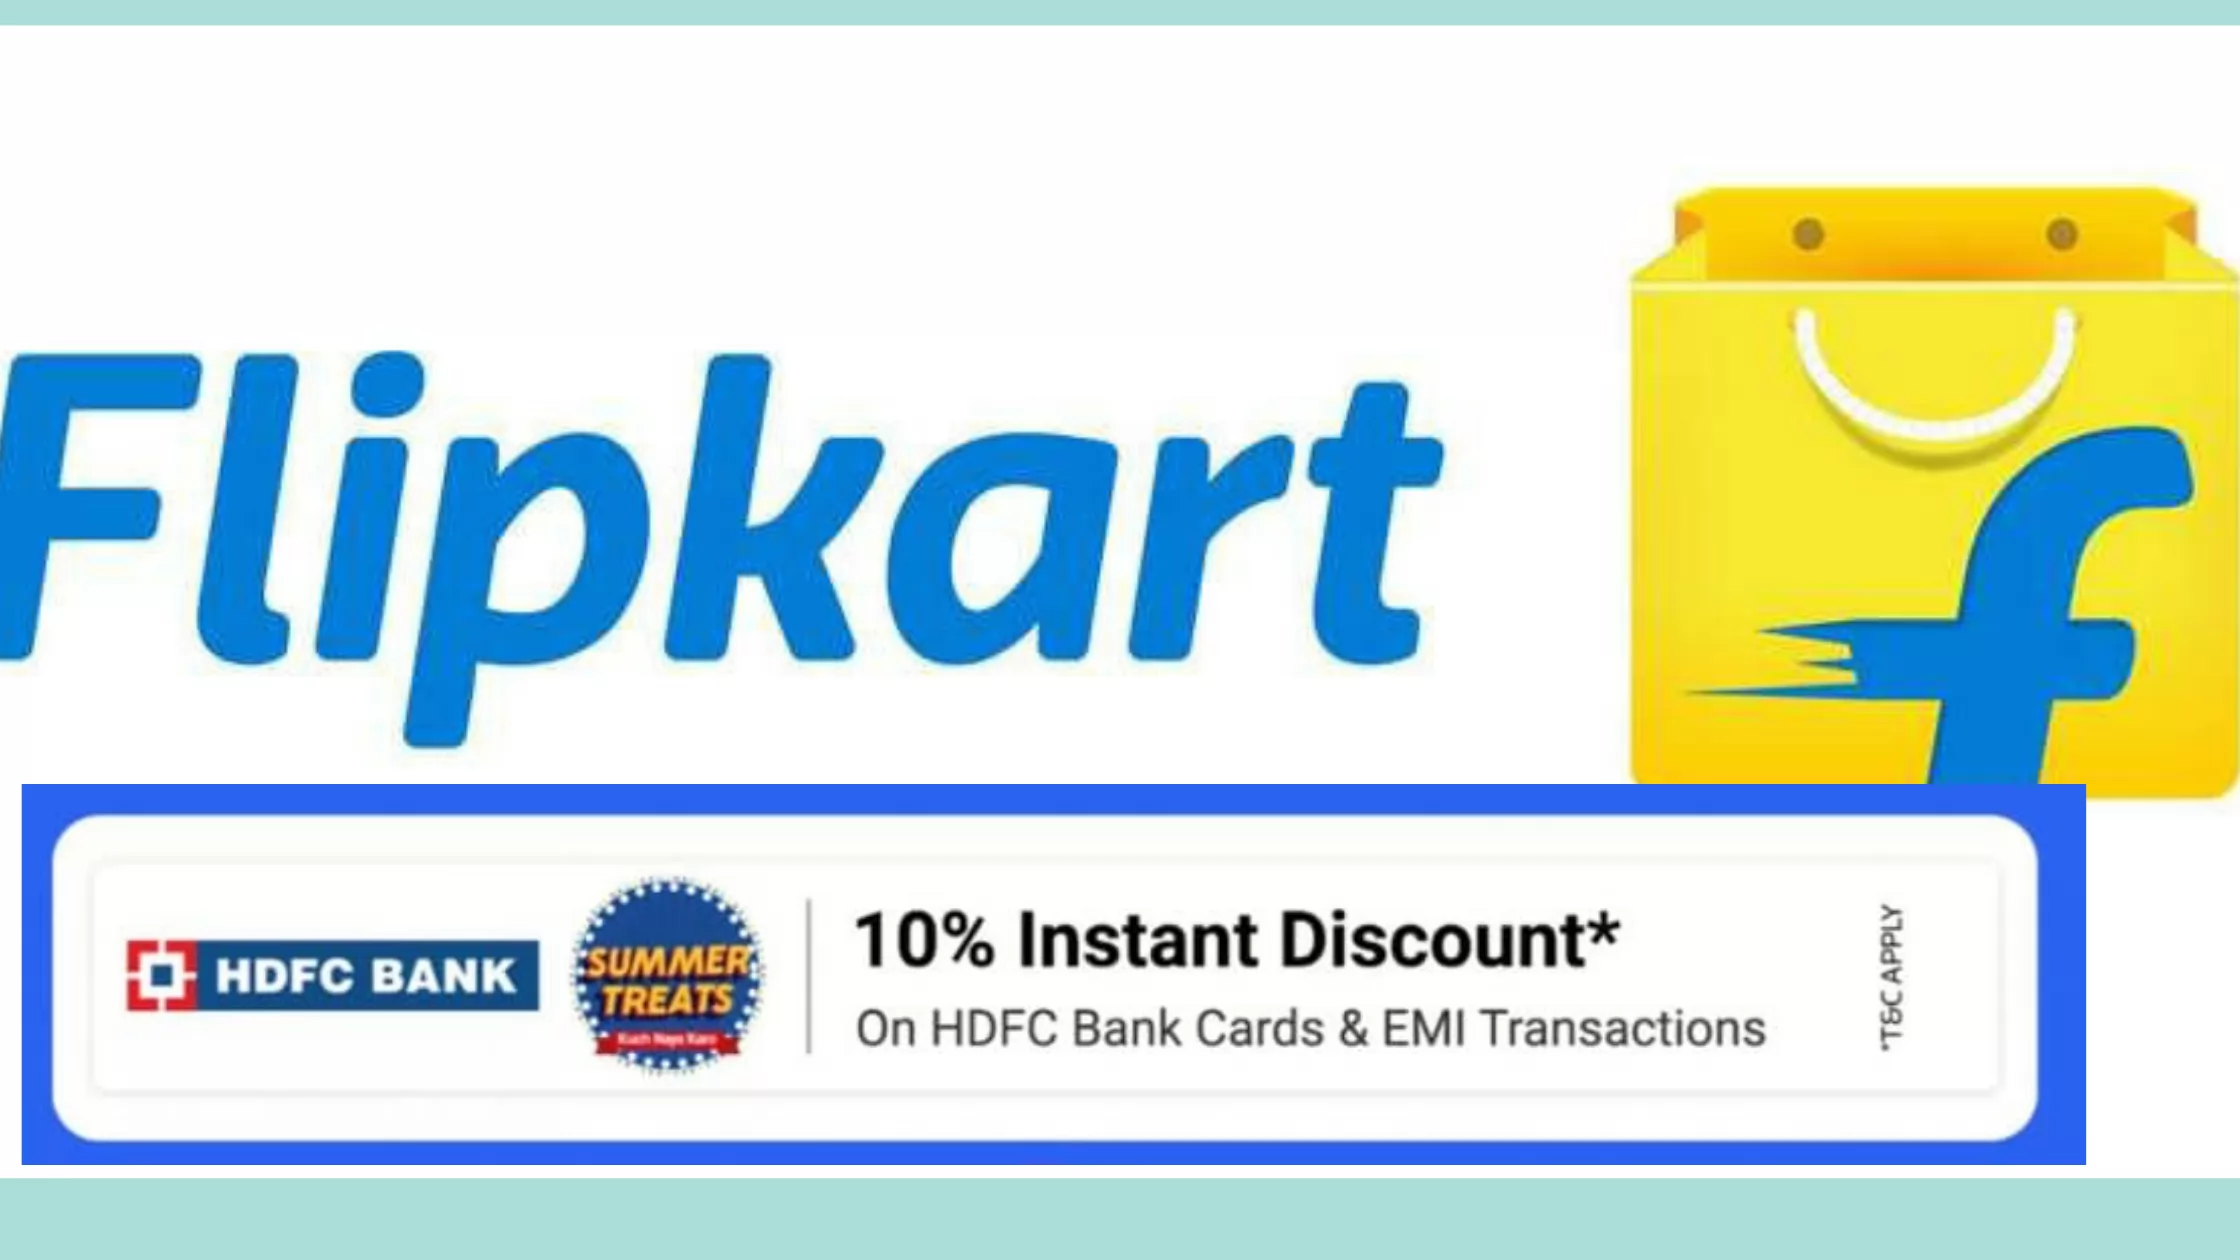  Flipkart HDFC Bank Offers 2021 - Get 10% Instant Discount on Every Purchase